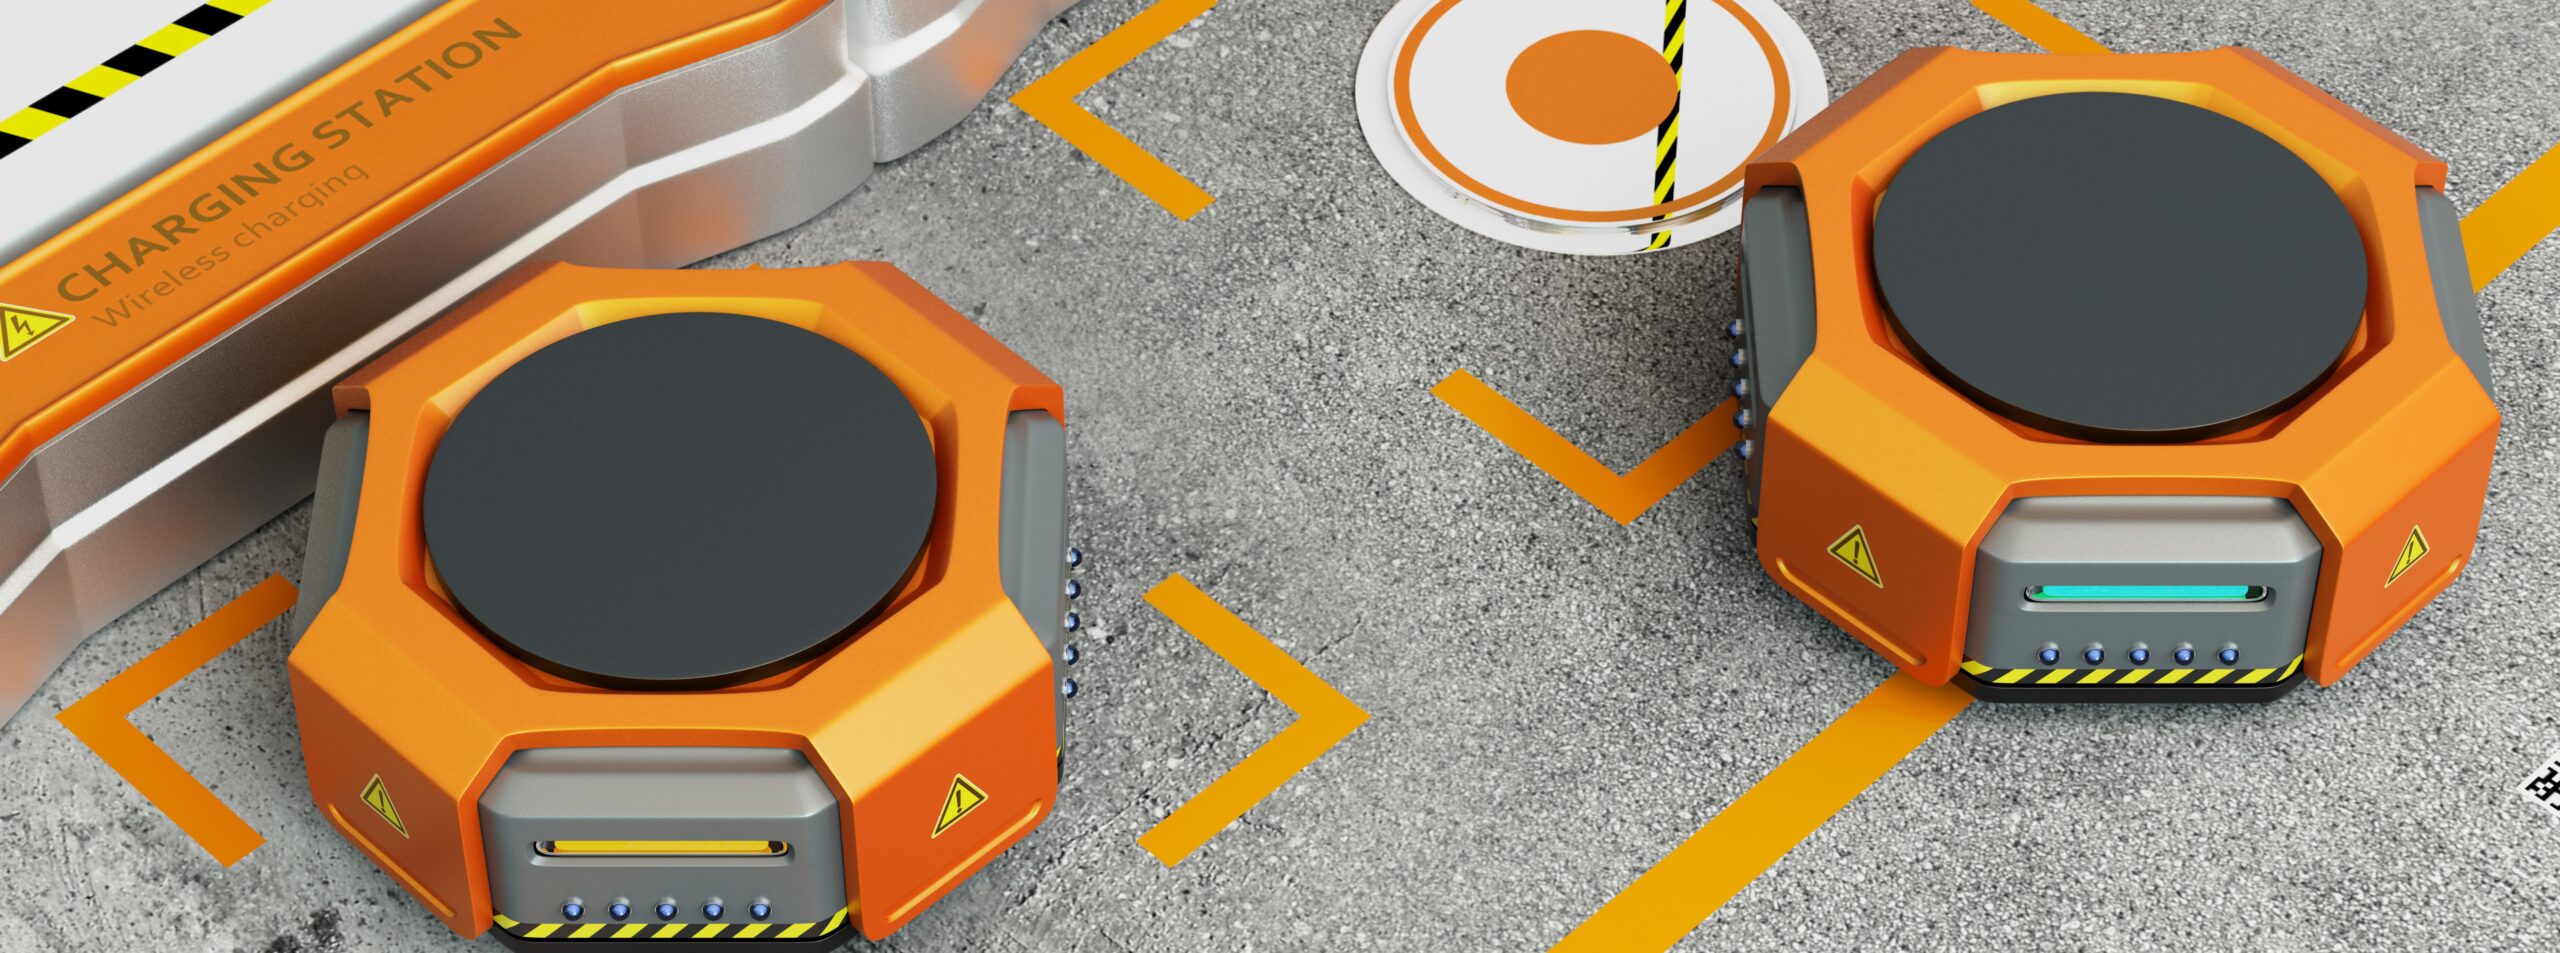 Comparing Wireless Charging Options For Mobile Robot